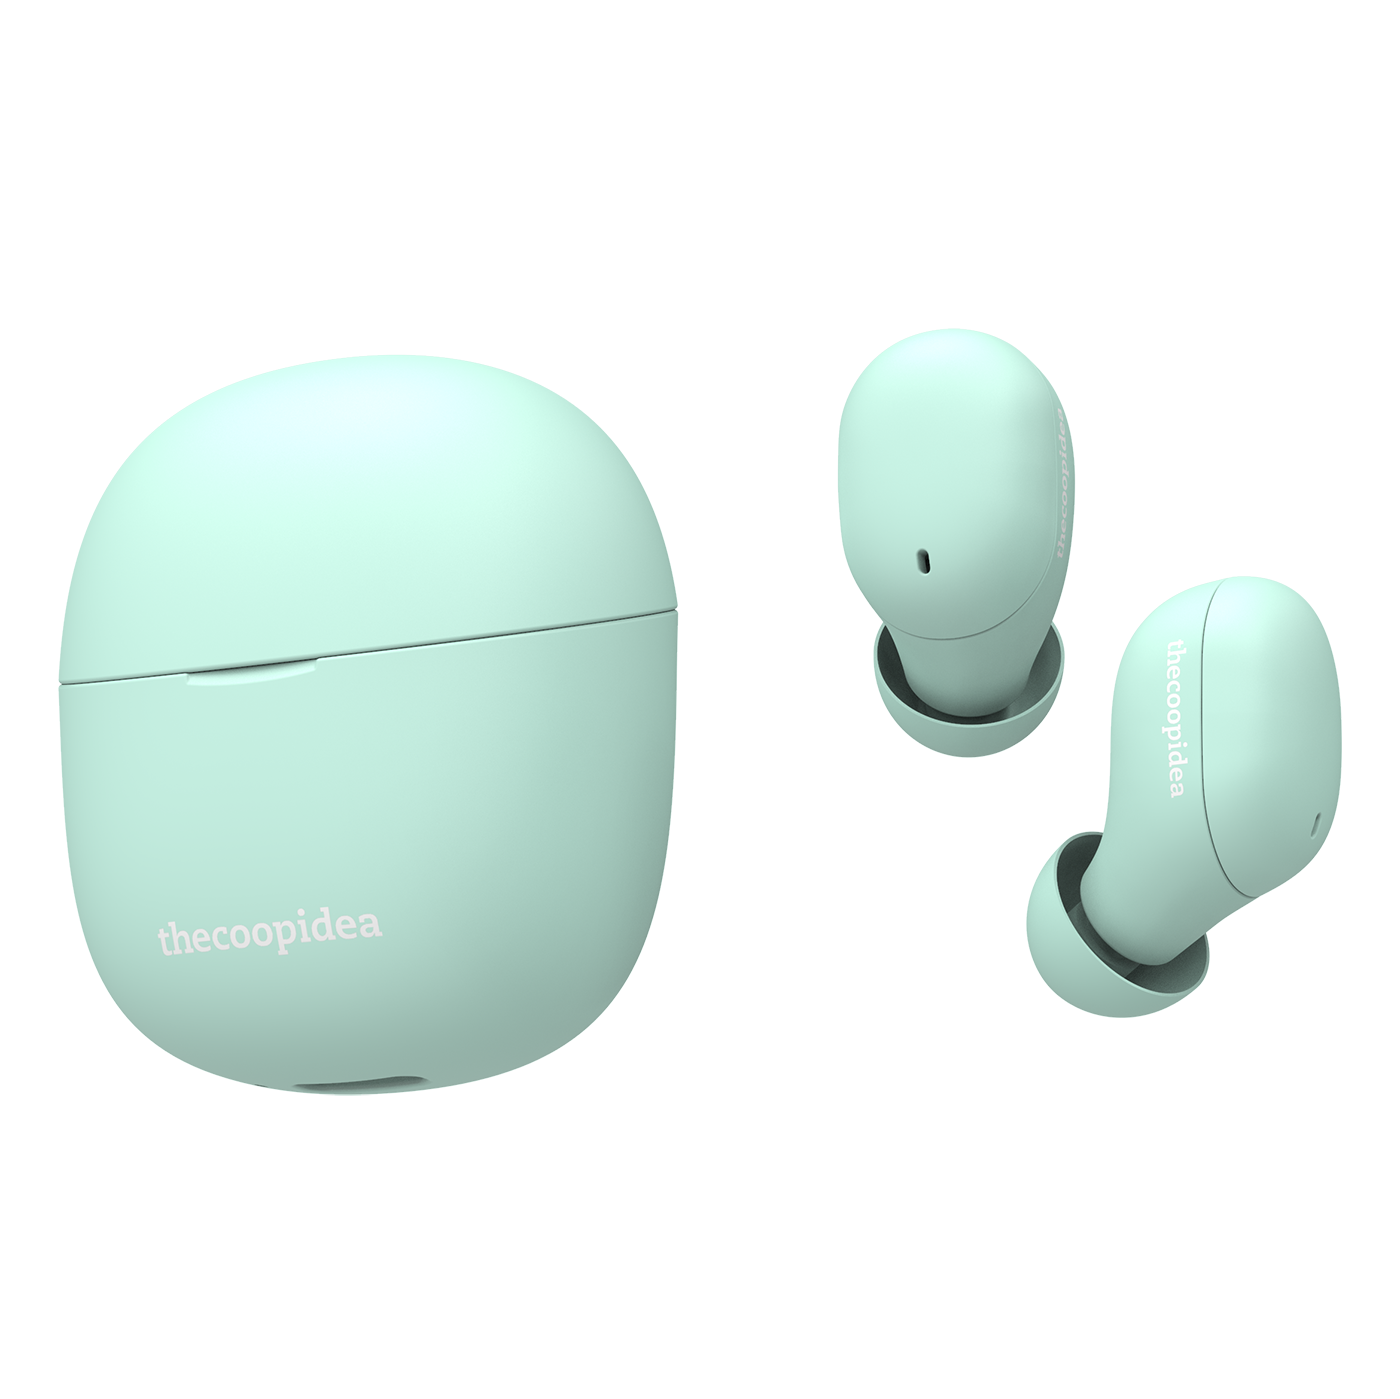 thecoopidea BEANS AIR True Wireless Earbuds - Turquoise